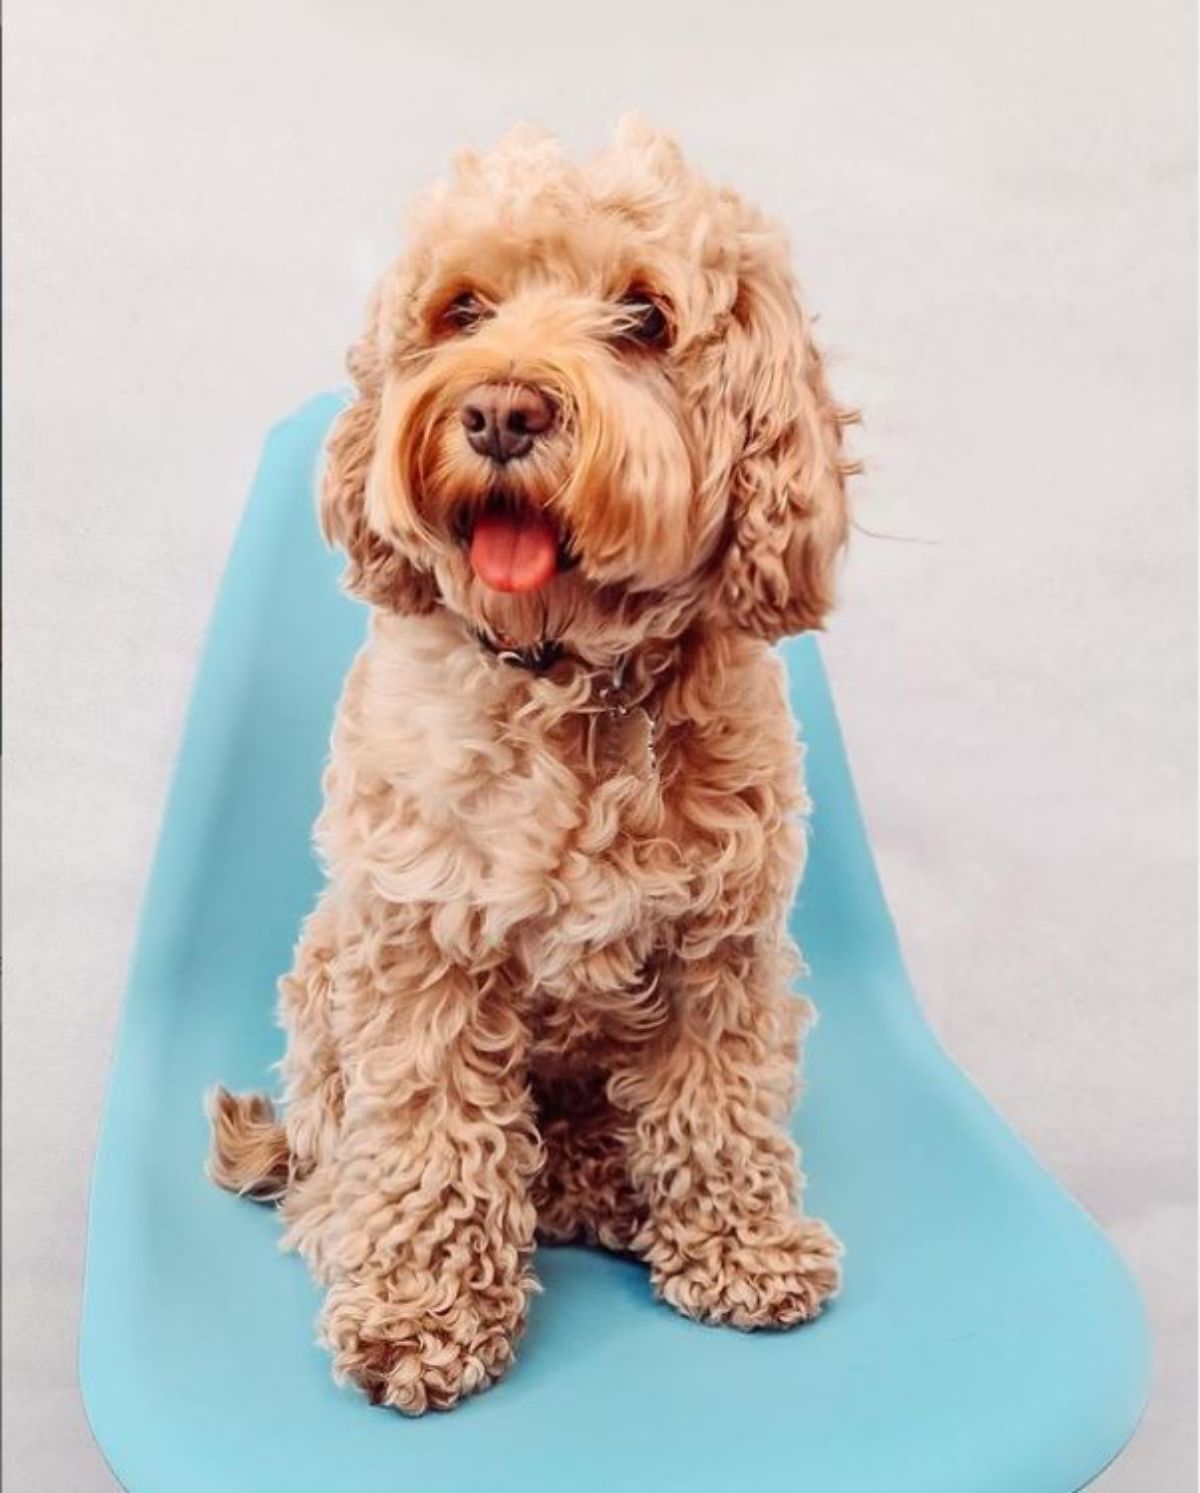 sitting cockerdoodle while it's tongue is sticking out in the blue aesthetic on the chair